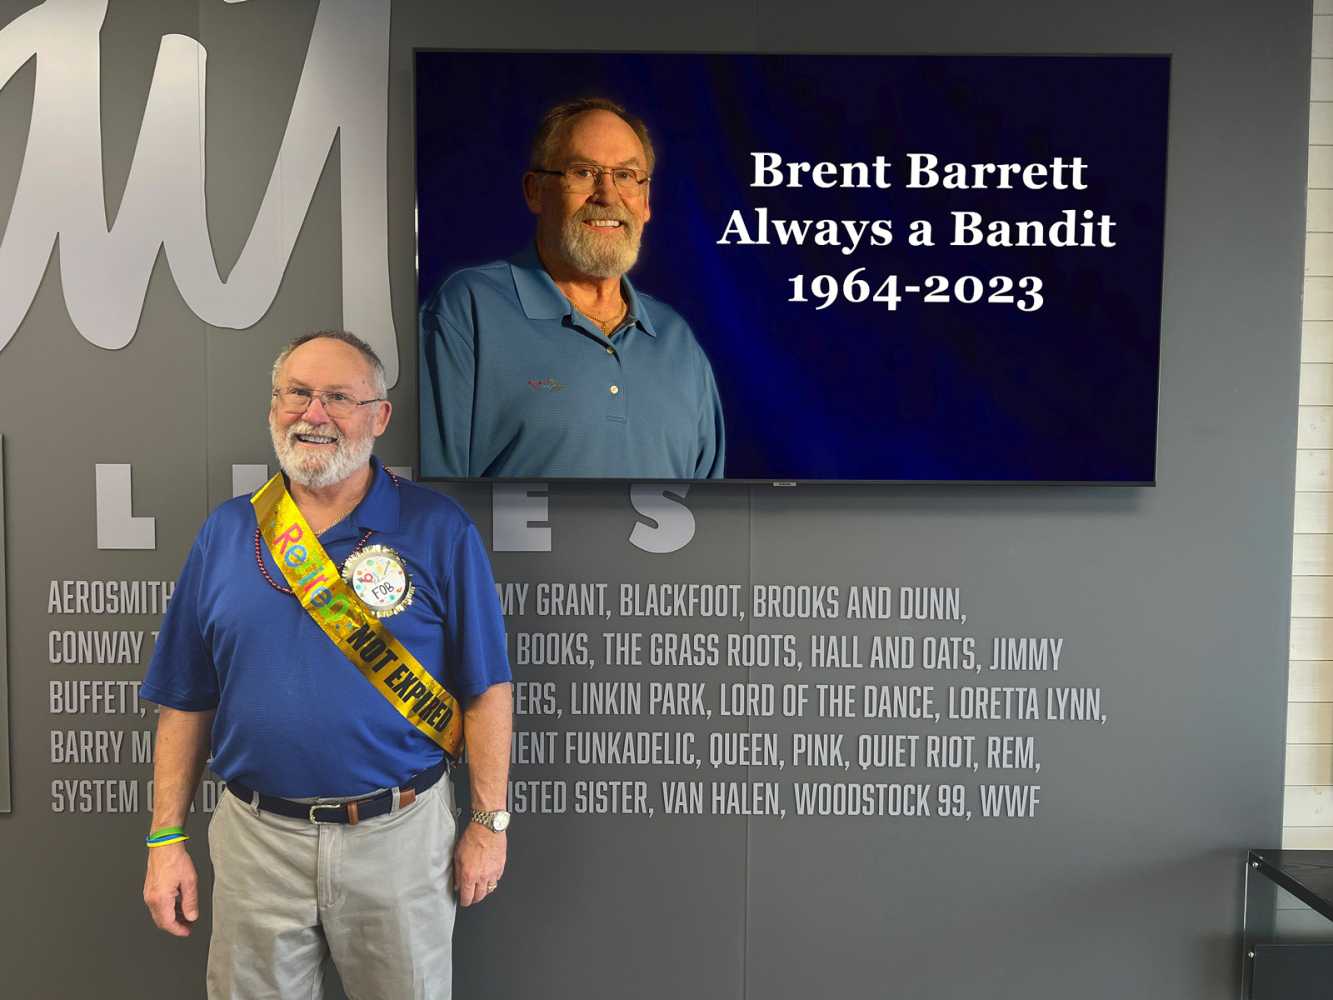 Brent Barrett has moved into his retirement